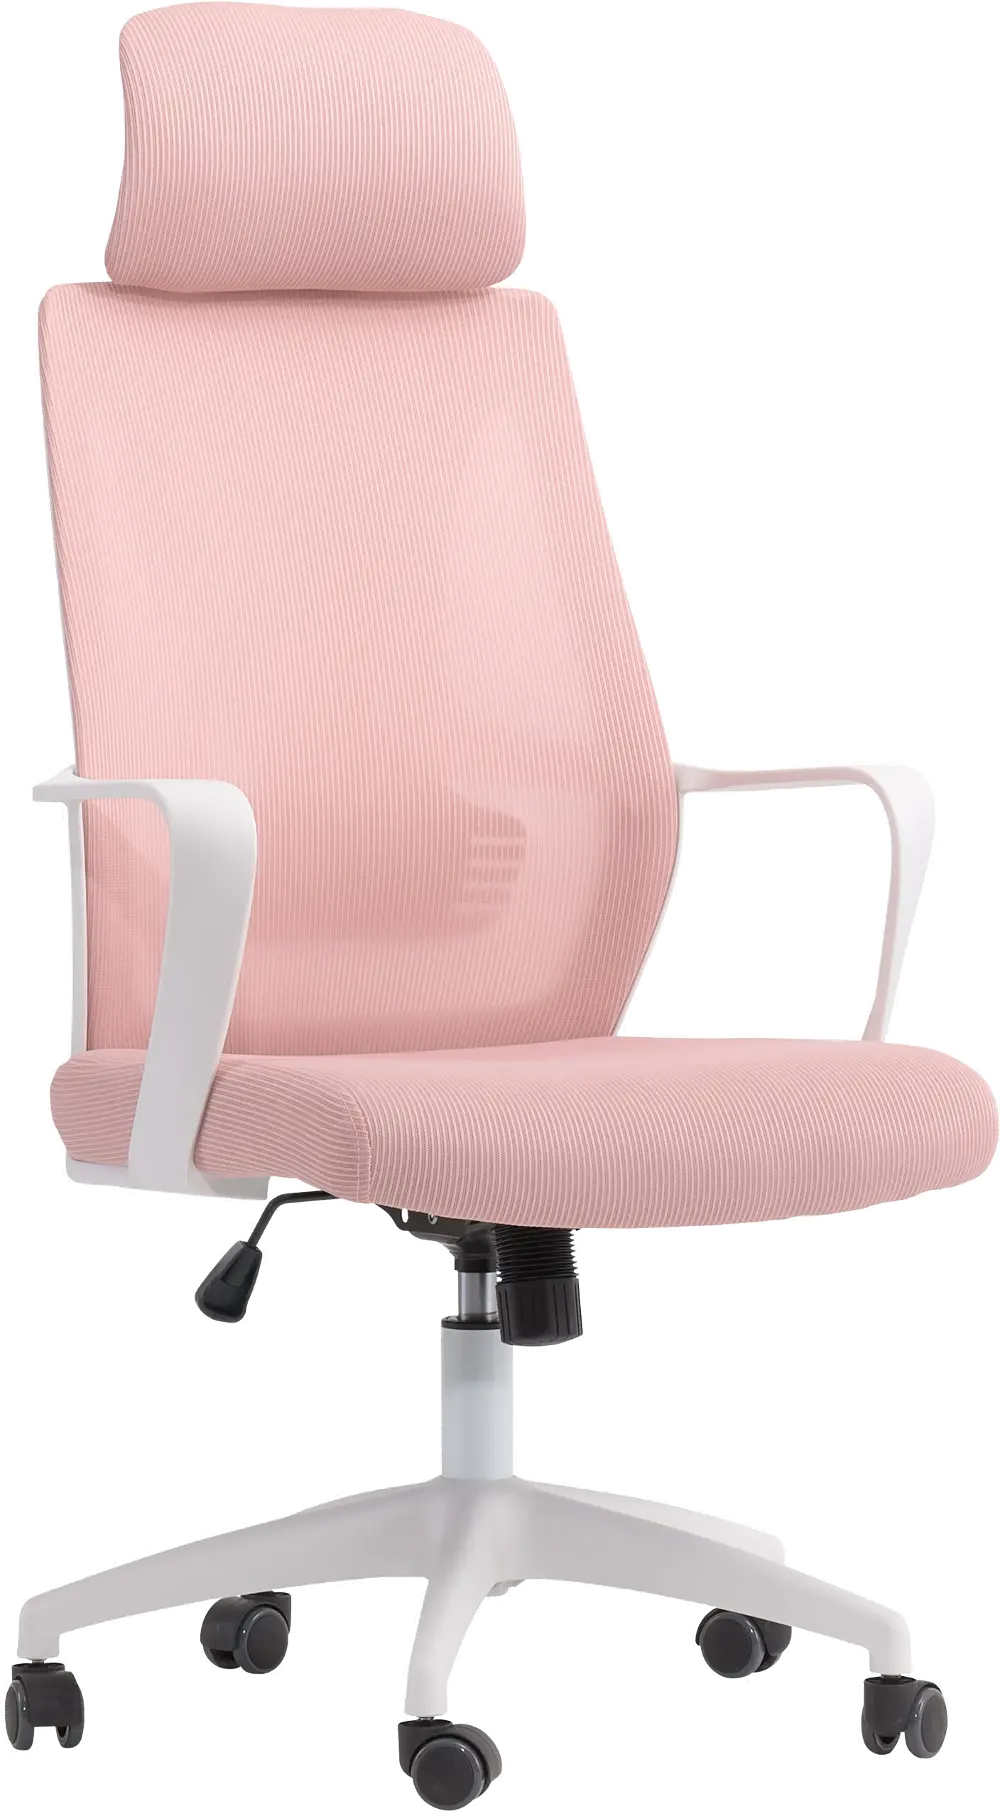 Workspace Pink Mesh Back Office Chair-1